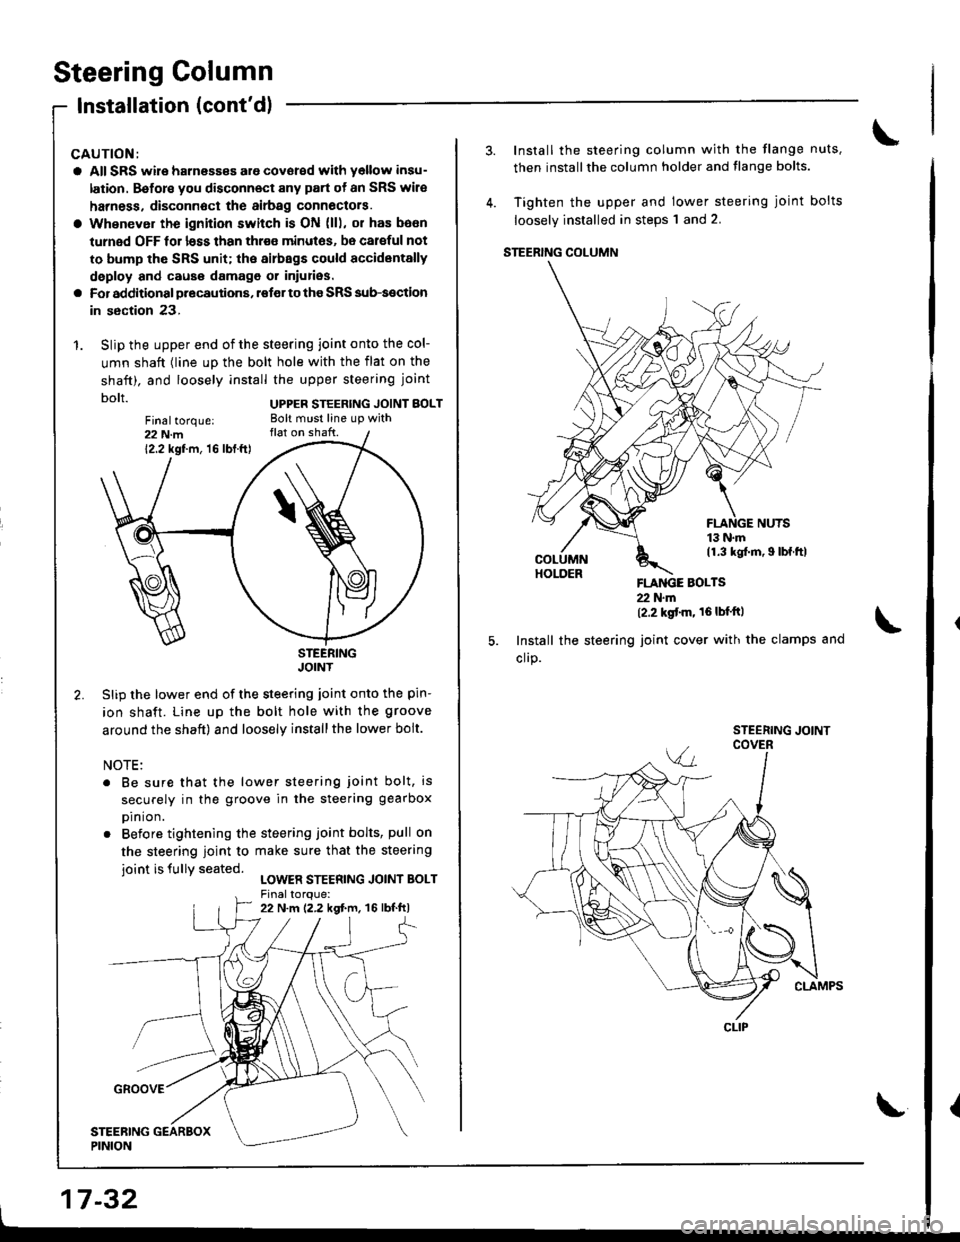 HONDA INTEGRA 1998 4.G Workshop Manual Steering Column
Installation (contdl
CAUTION:
a All SRS wire harness€s are covored with yollow insu-
lation. B€fors you disconnect any part of an SRS wire
harness. disconnoct the airbag connoctoi